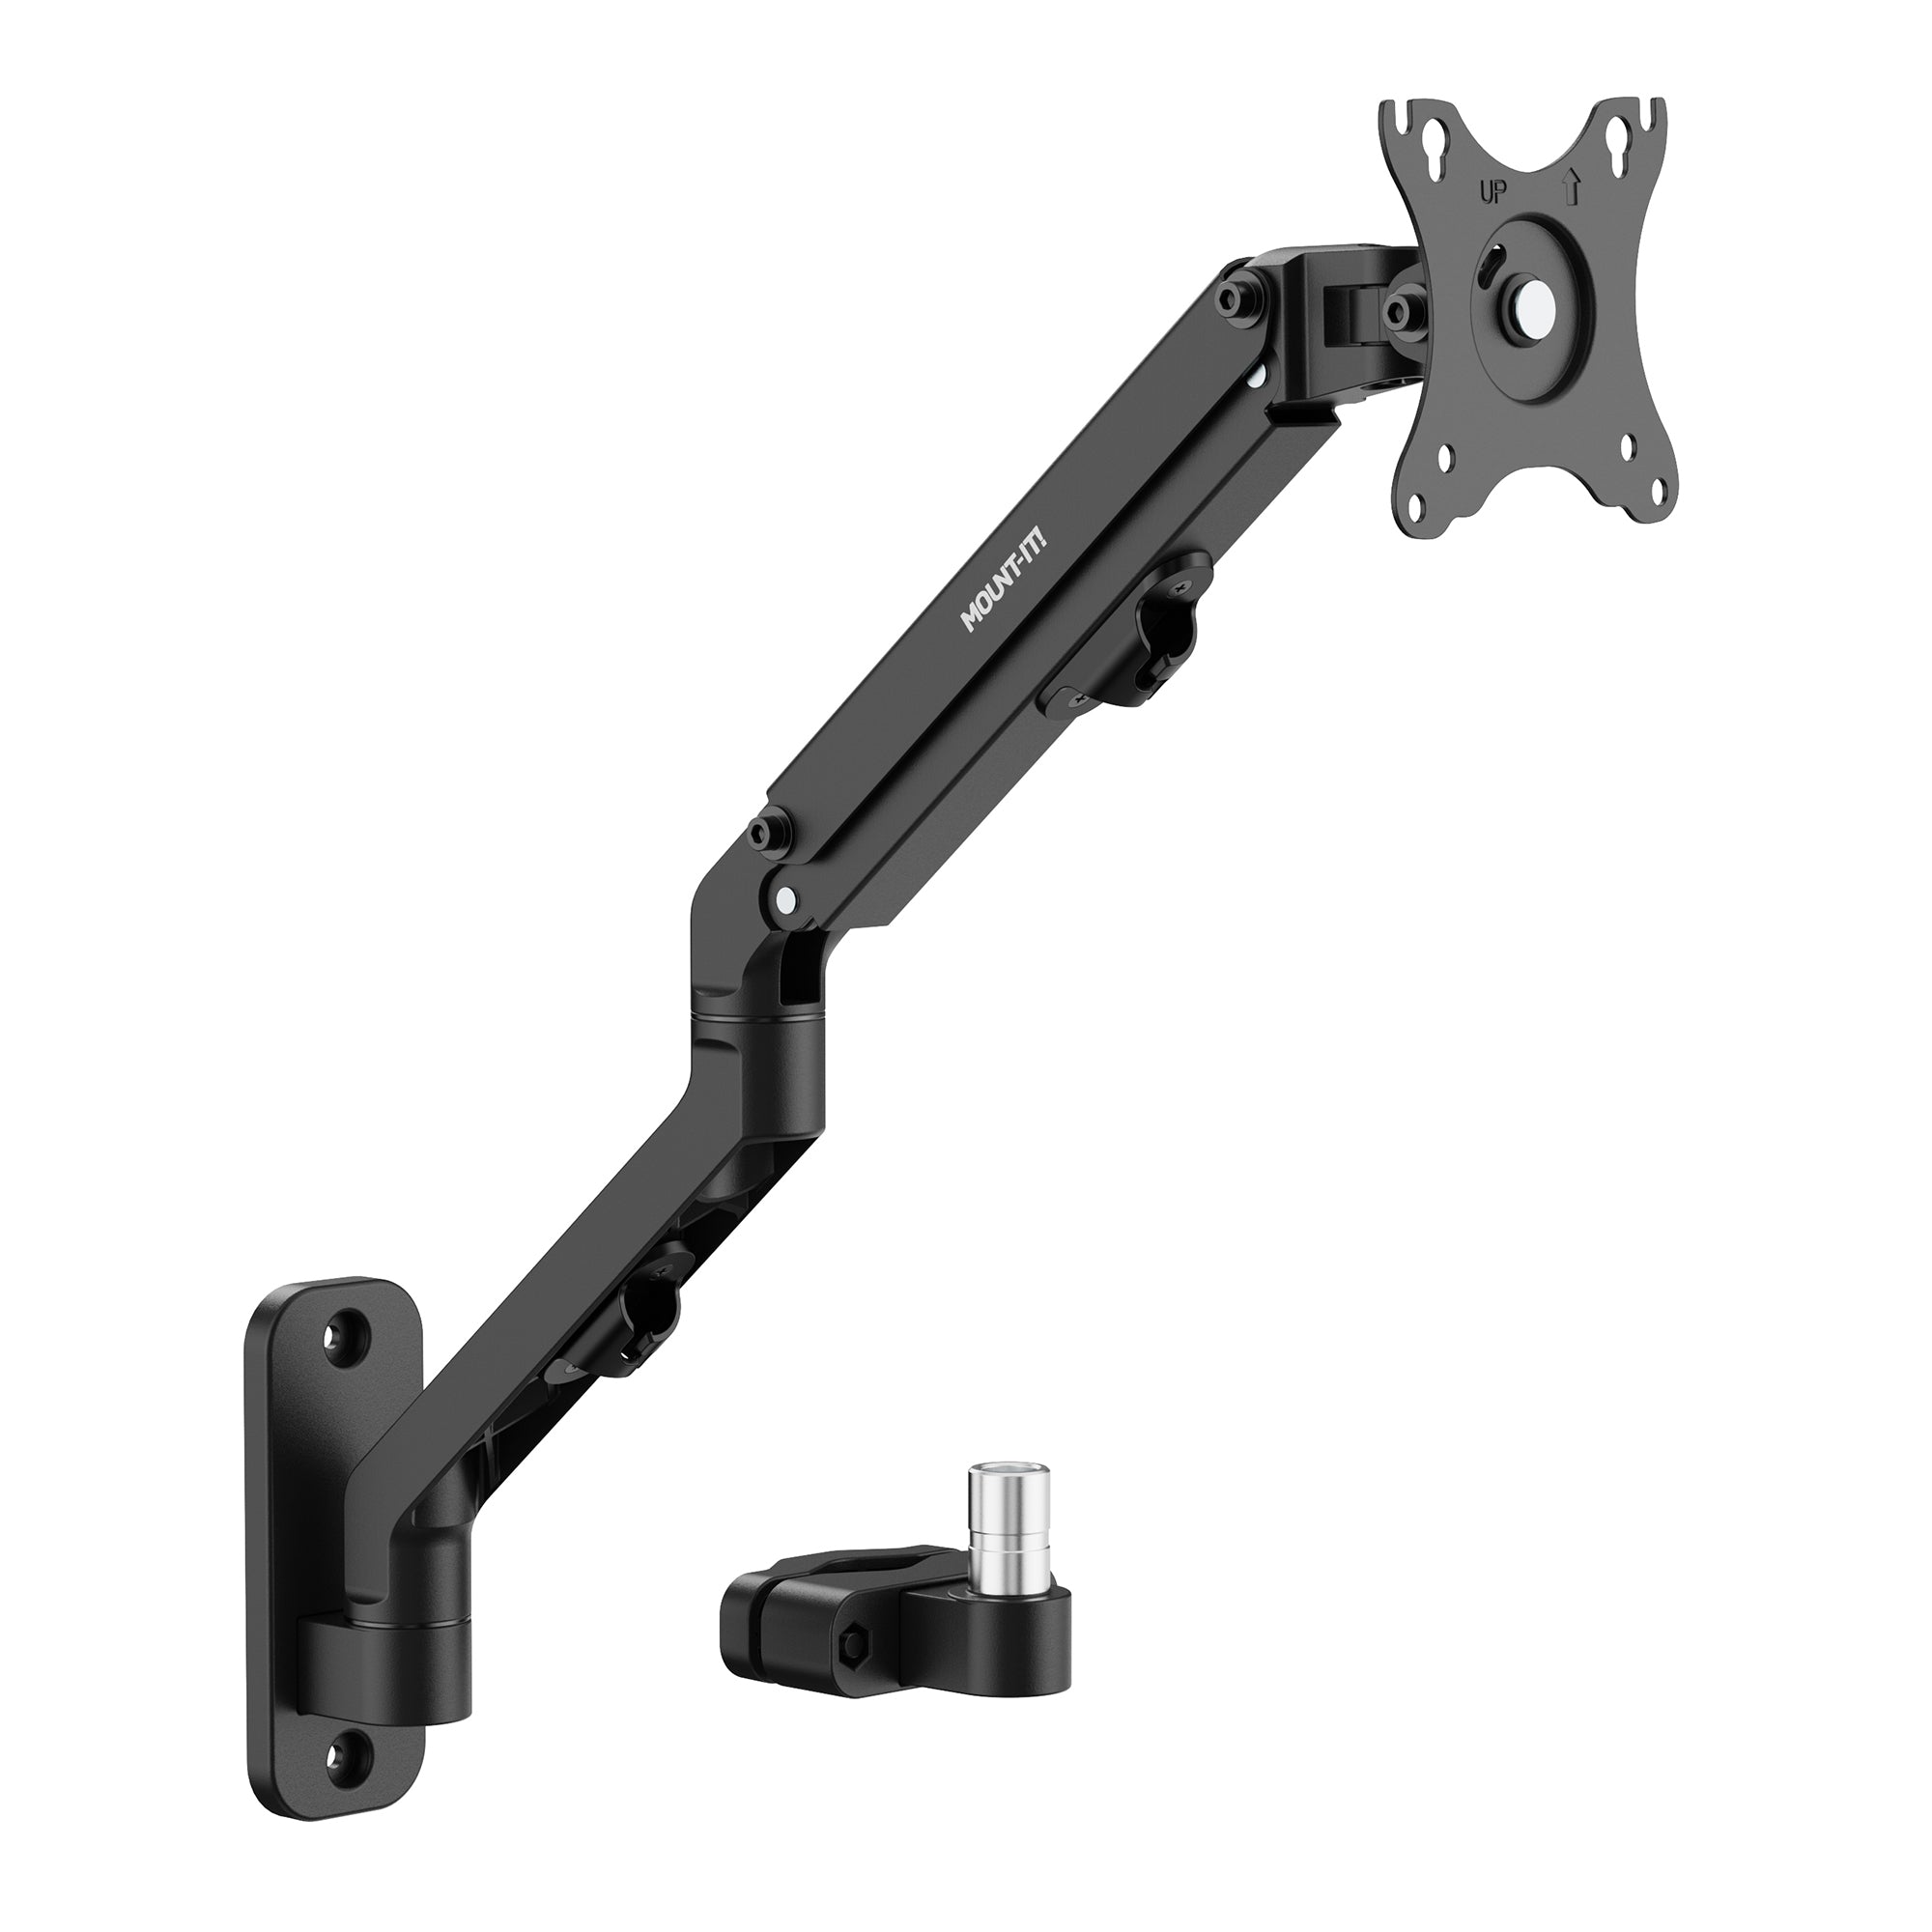 Counterbalance Monitor Arm for Wall and Pole Mounting